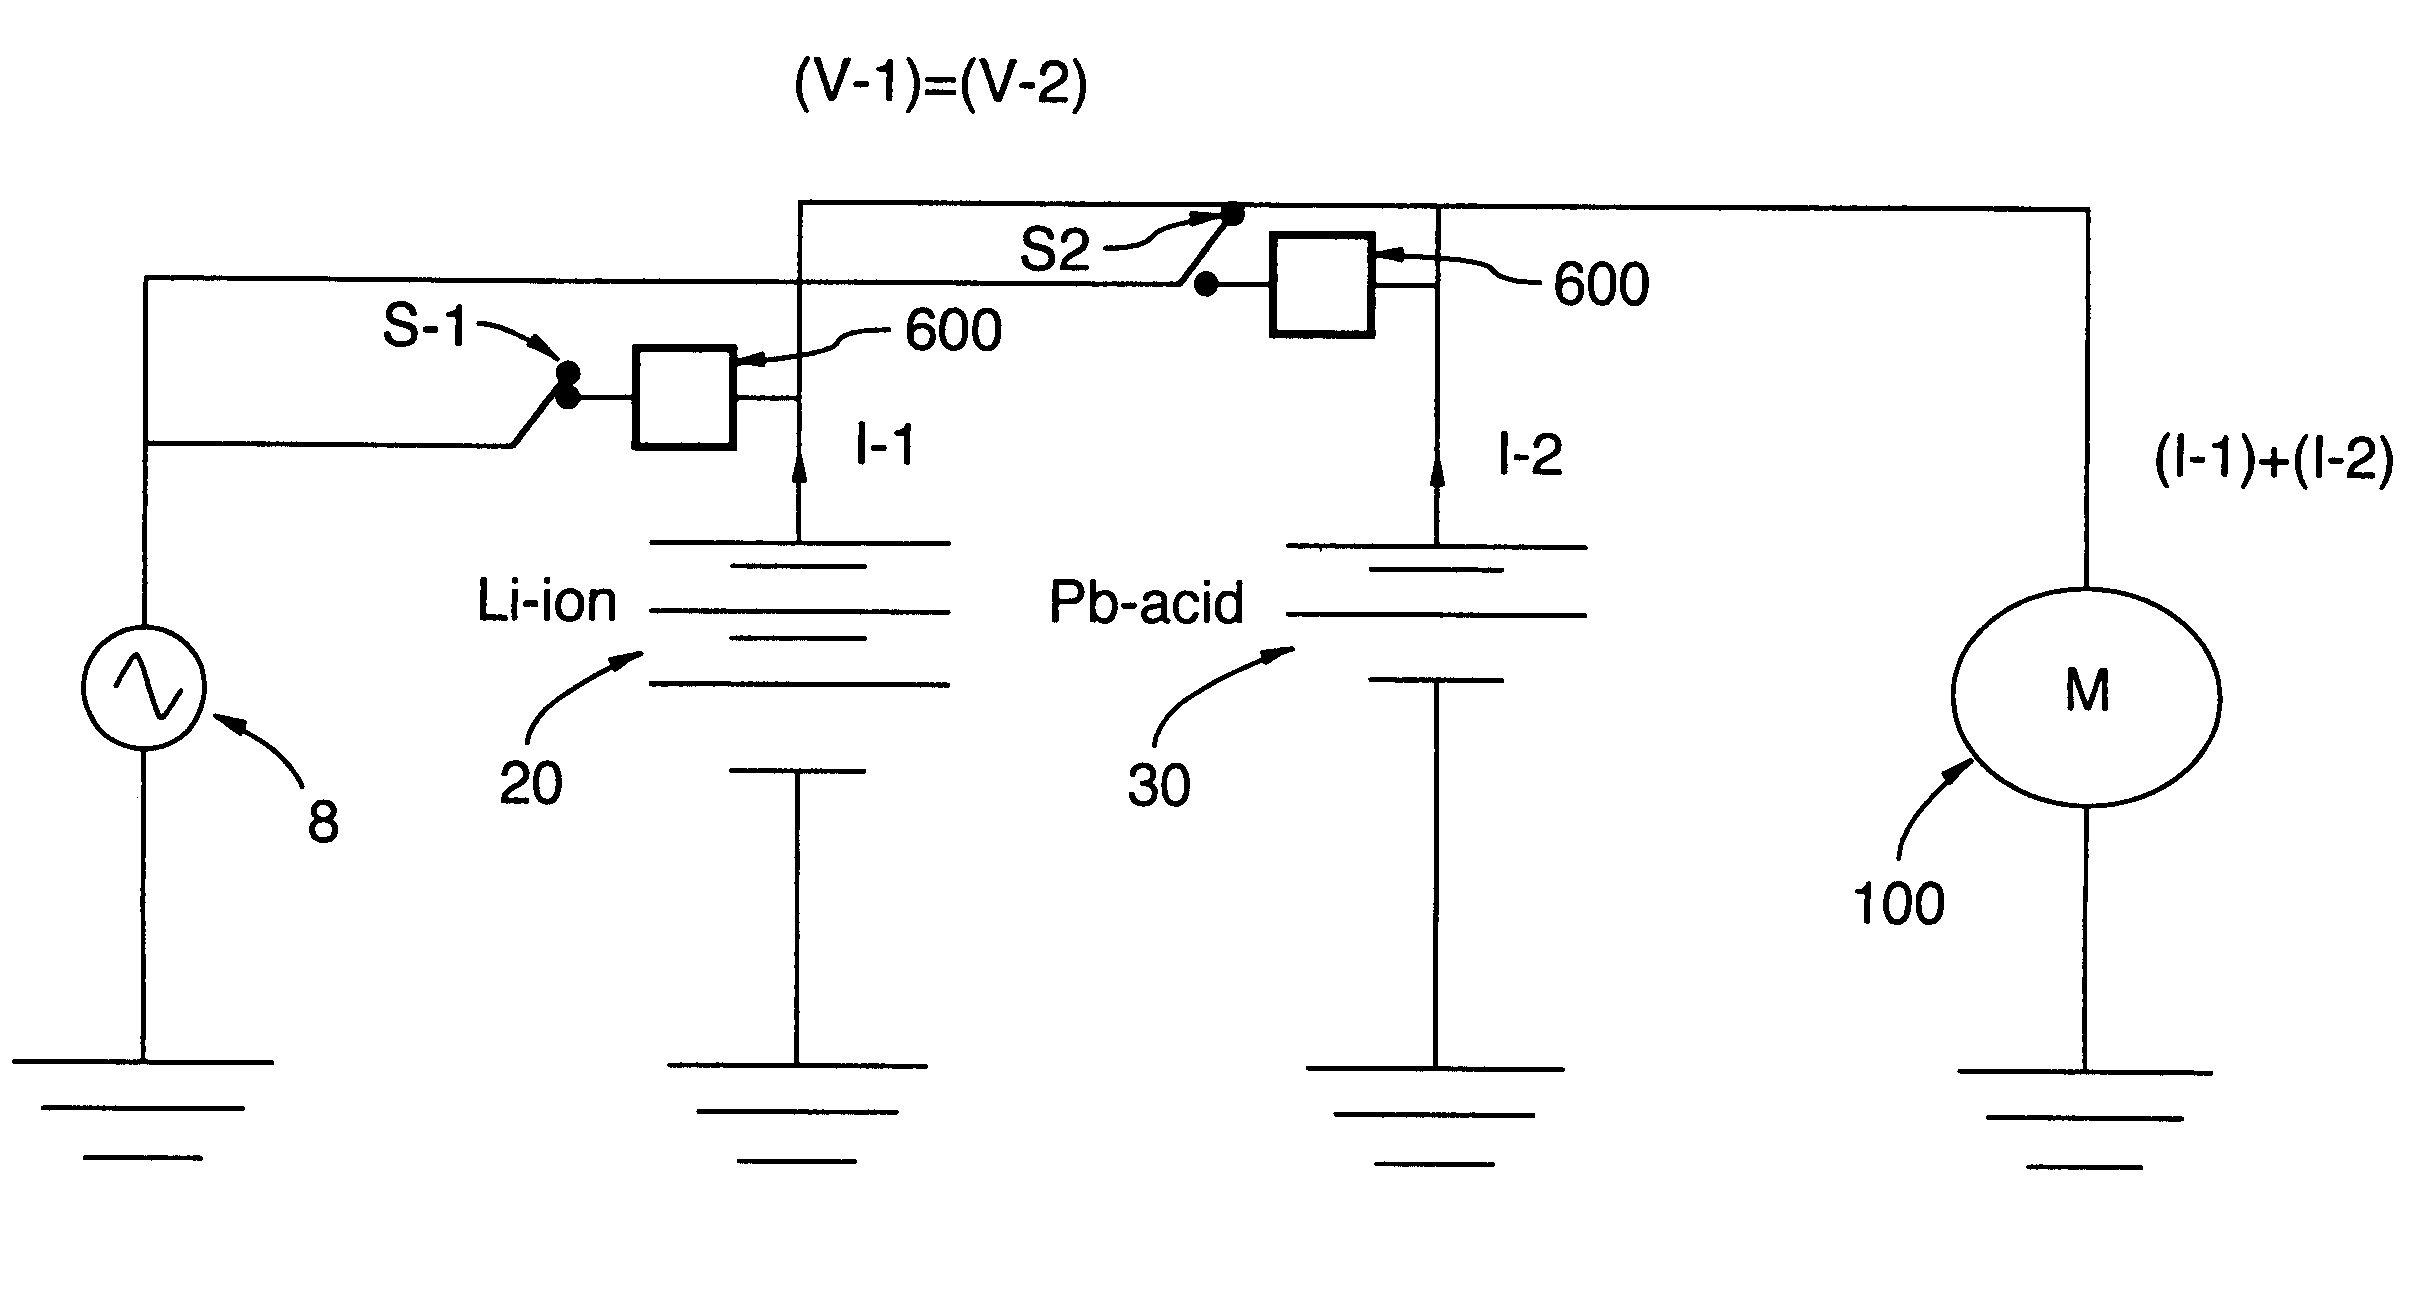 Energy storage device for loads having variable power rates